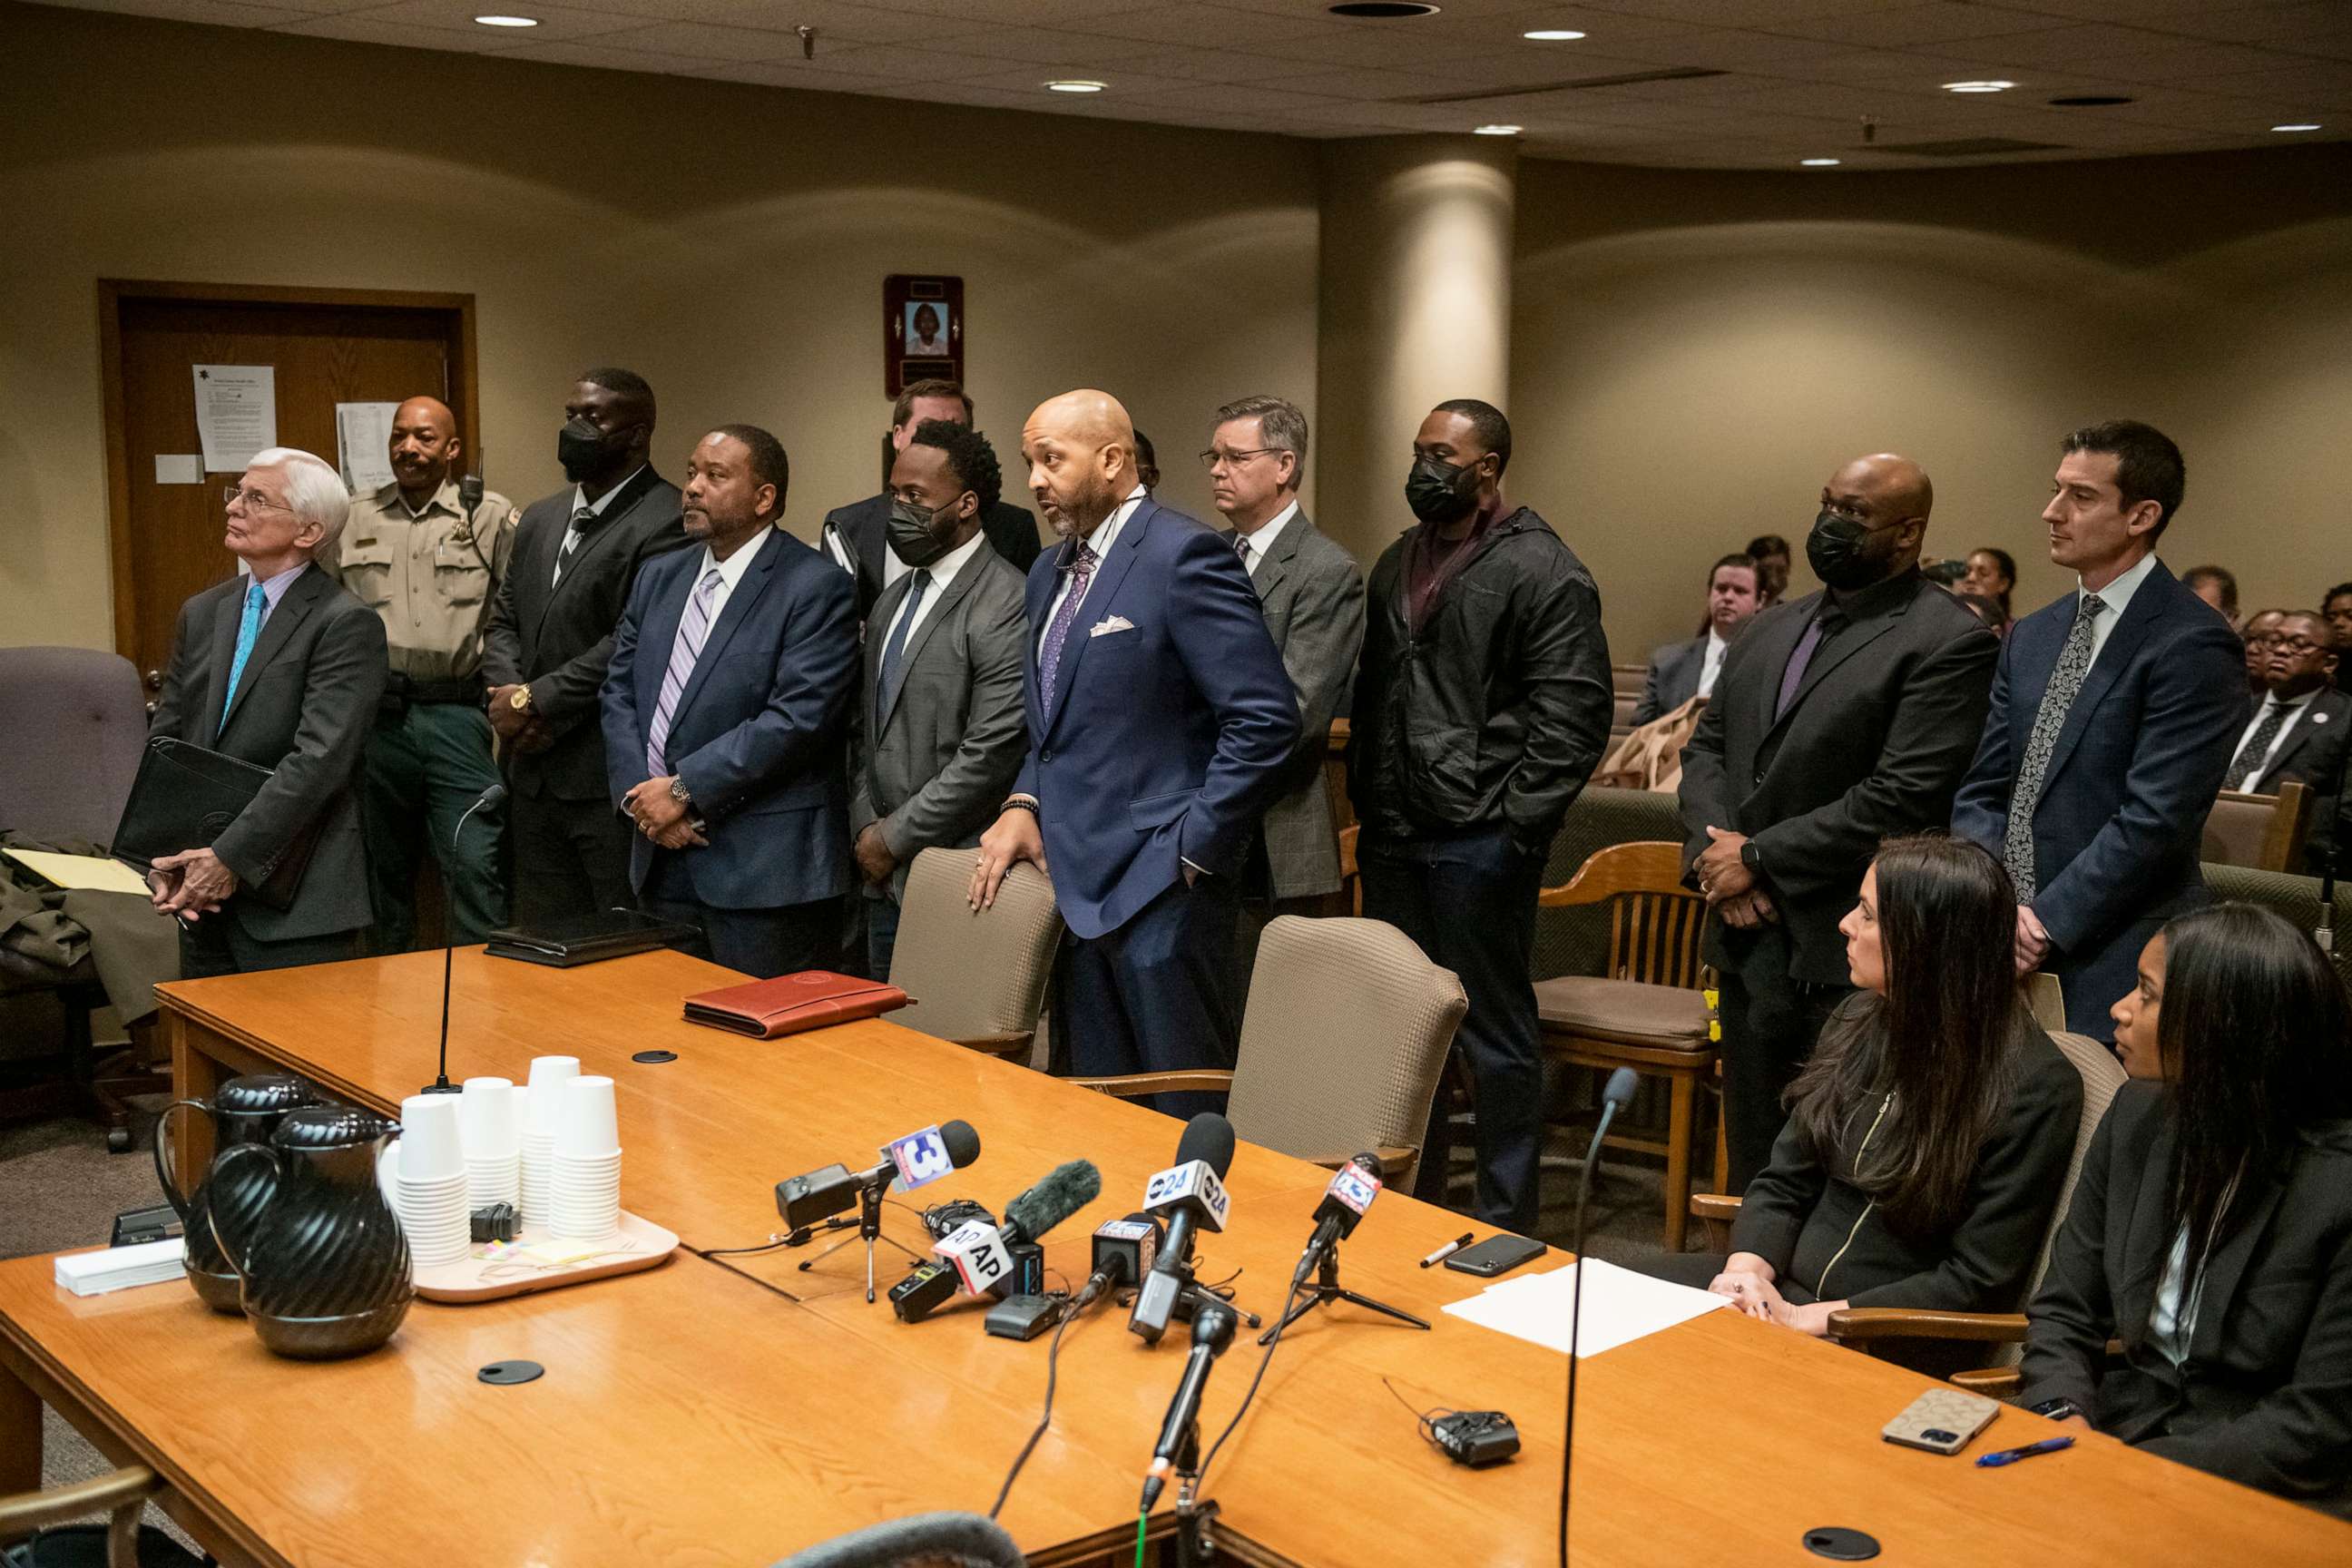 PHOTO: The former Memphis police officers accused of murder in the death of Tyre Nichols appear with their attorneys at an indictment hearing at the Shelby County Criminal Justice Center, Feb. 17, 2023, in Memphis.